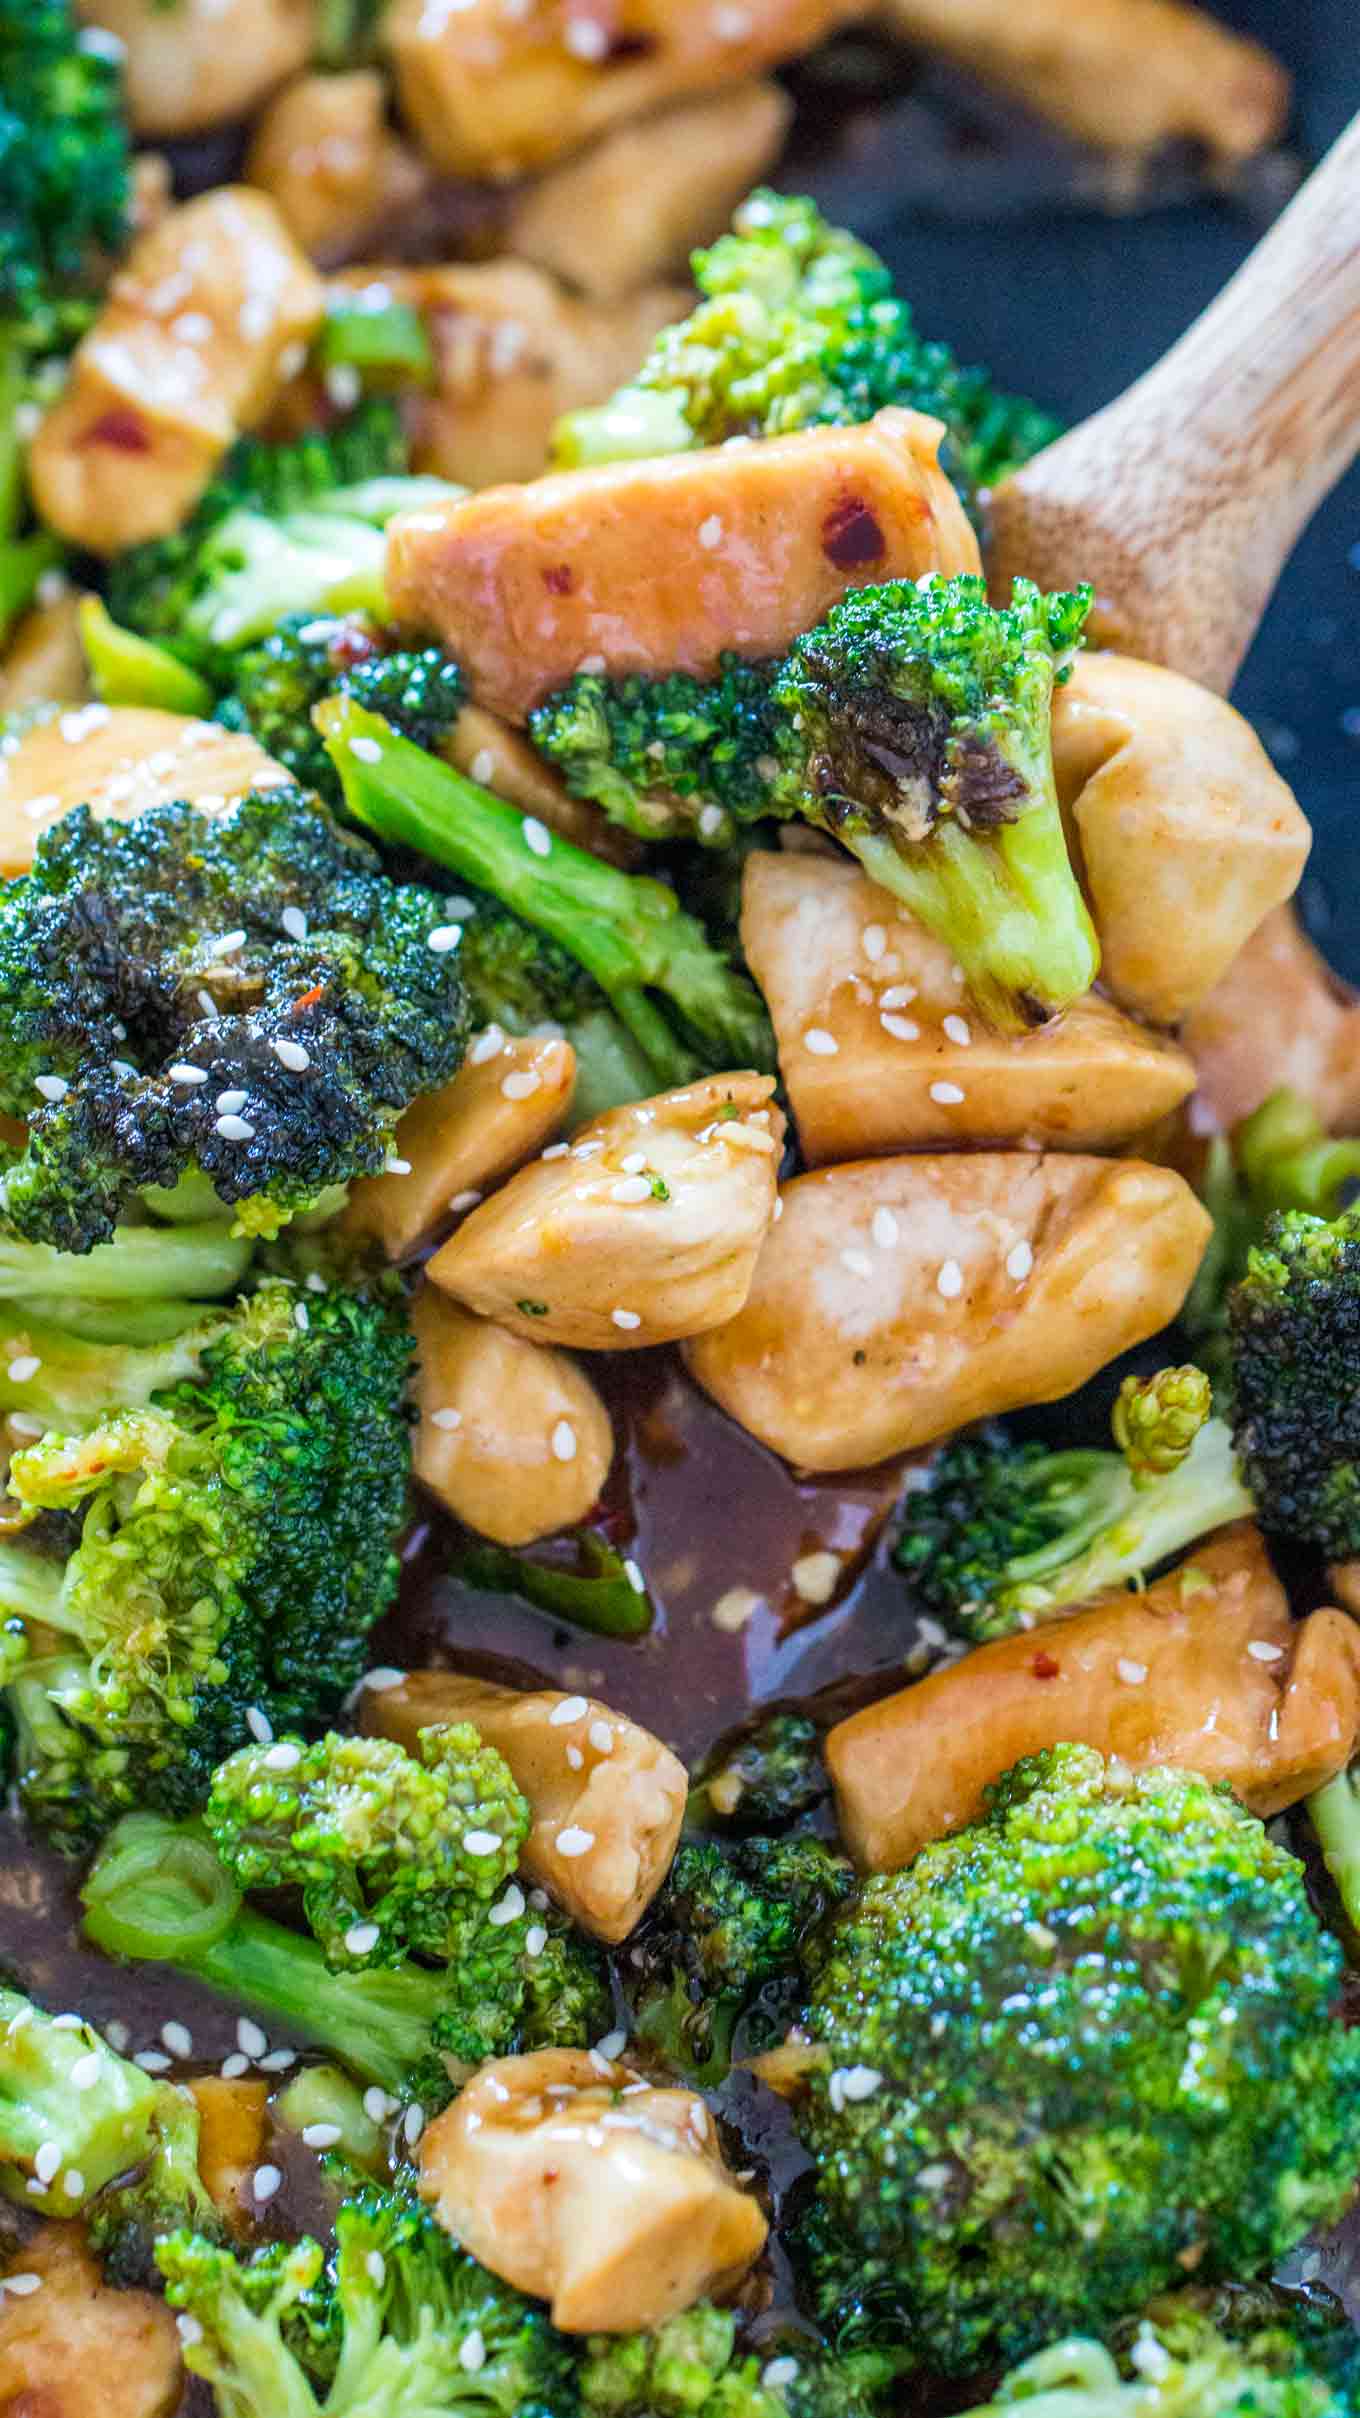 Chicken And Broccoli Stir Fry Video Sweet And Savory Meals